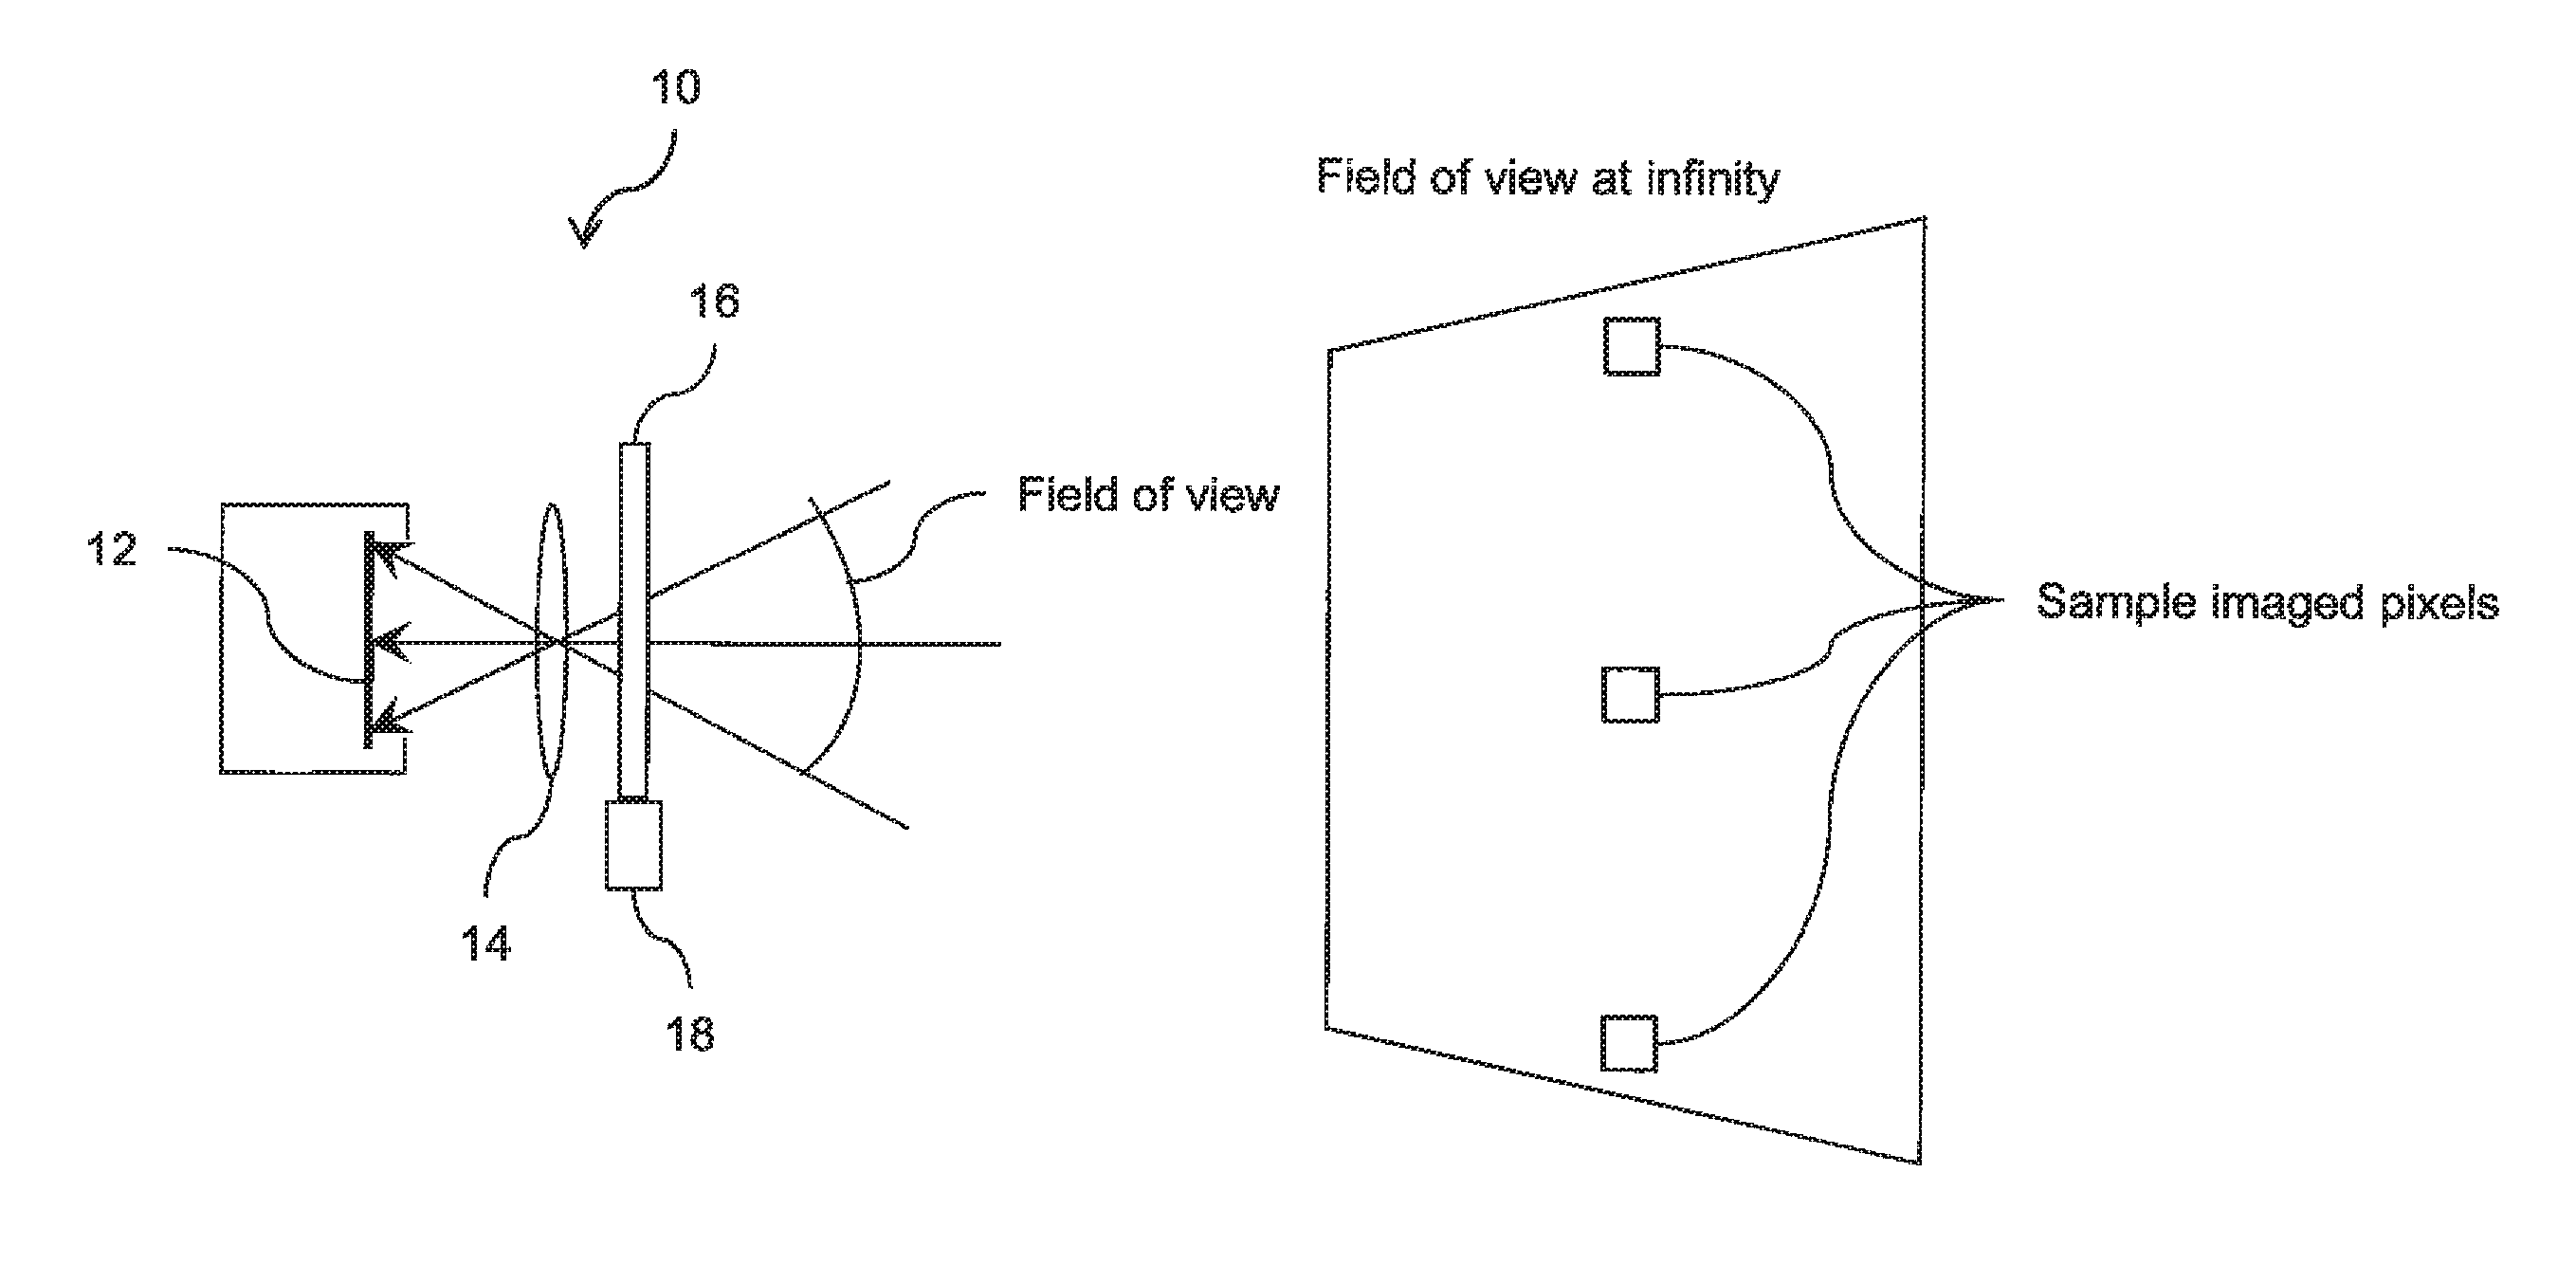 Infrared detection and imaging device with no moving parts